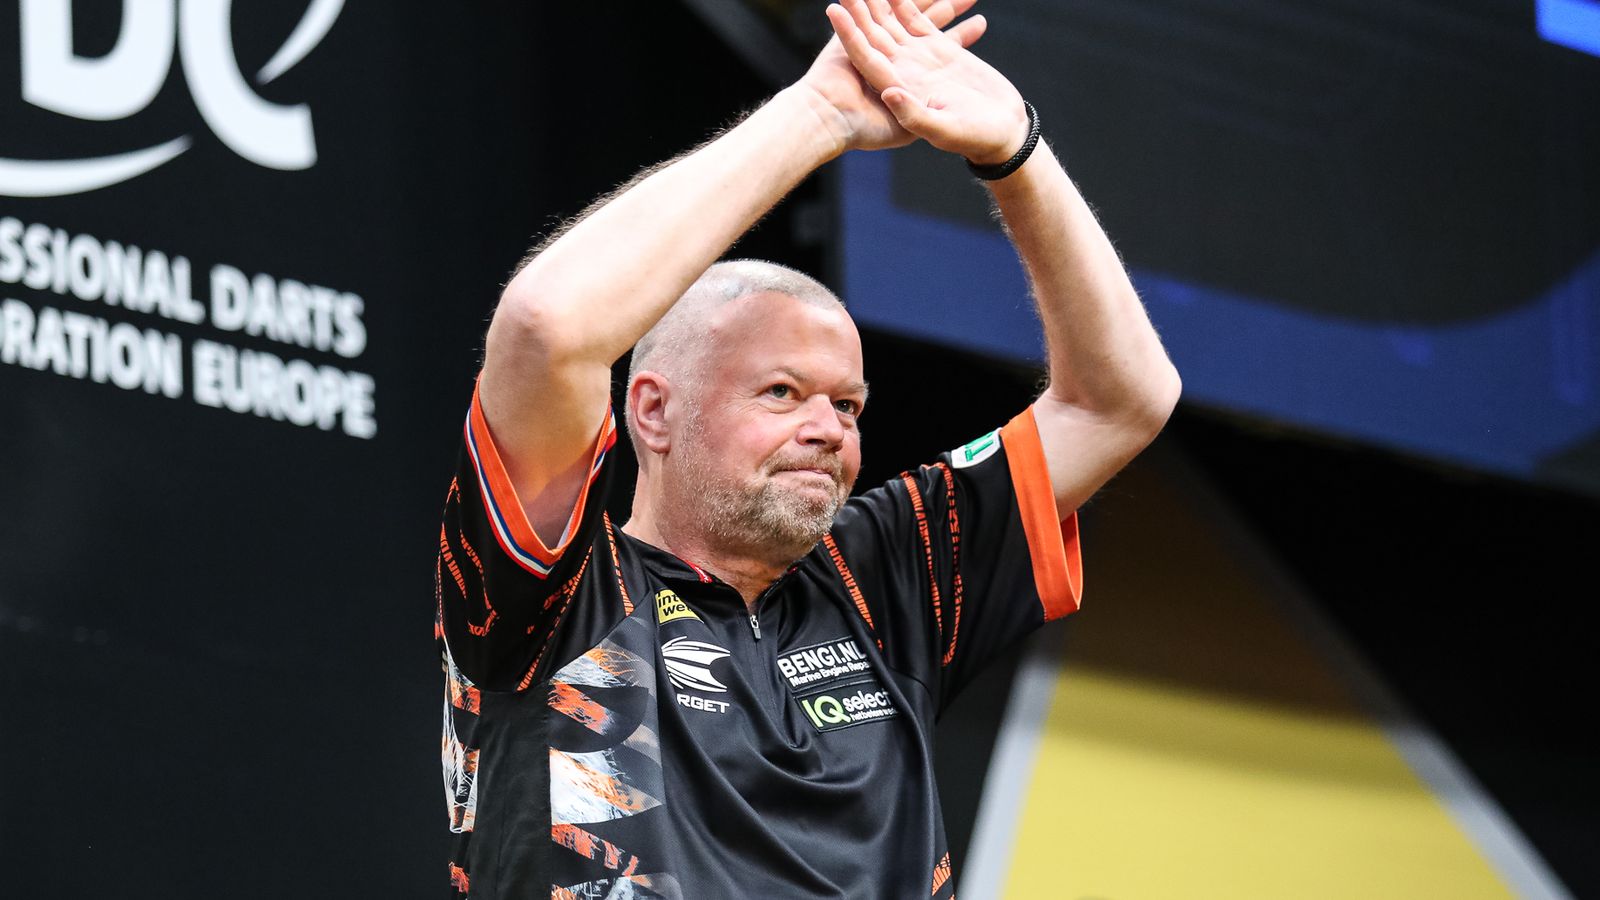 Darts Information: Raymond van Barneveld causes upset by defeating Michael Smith at World Collection of Darts finals in Amsterdam